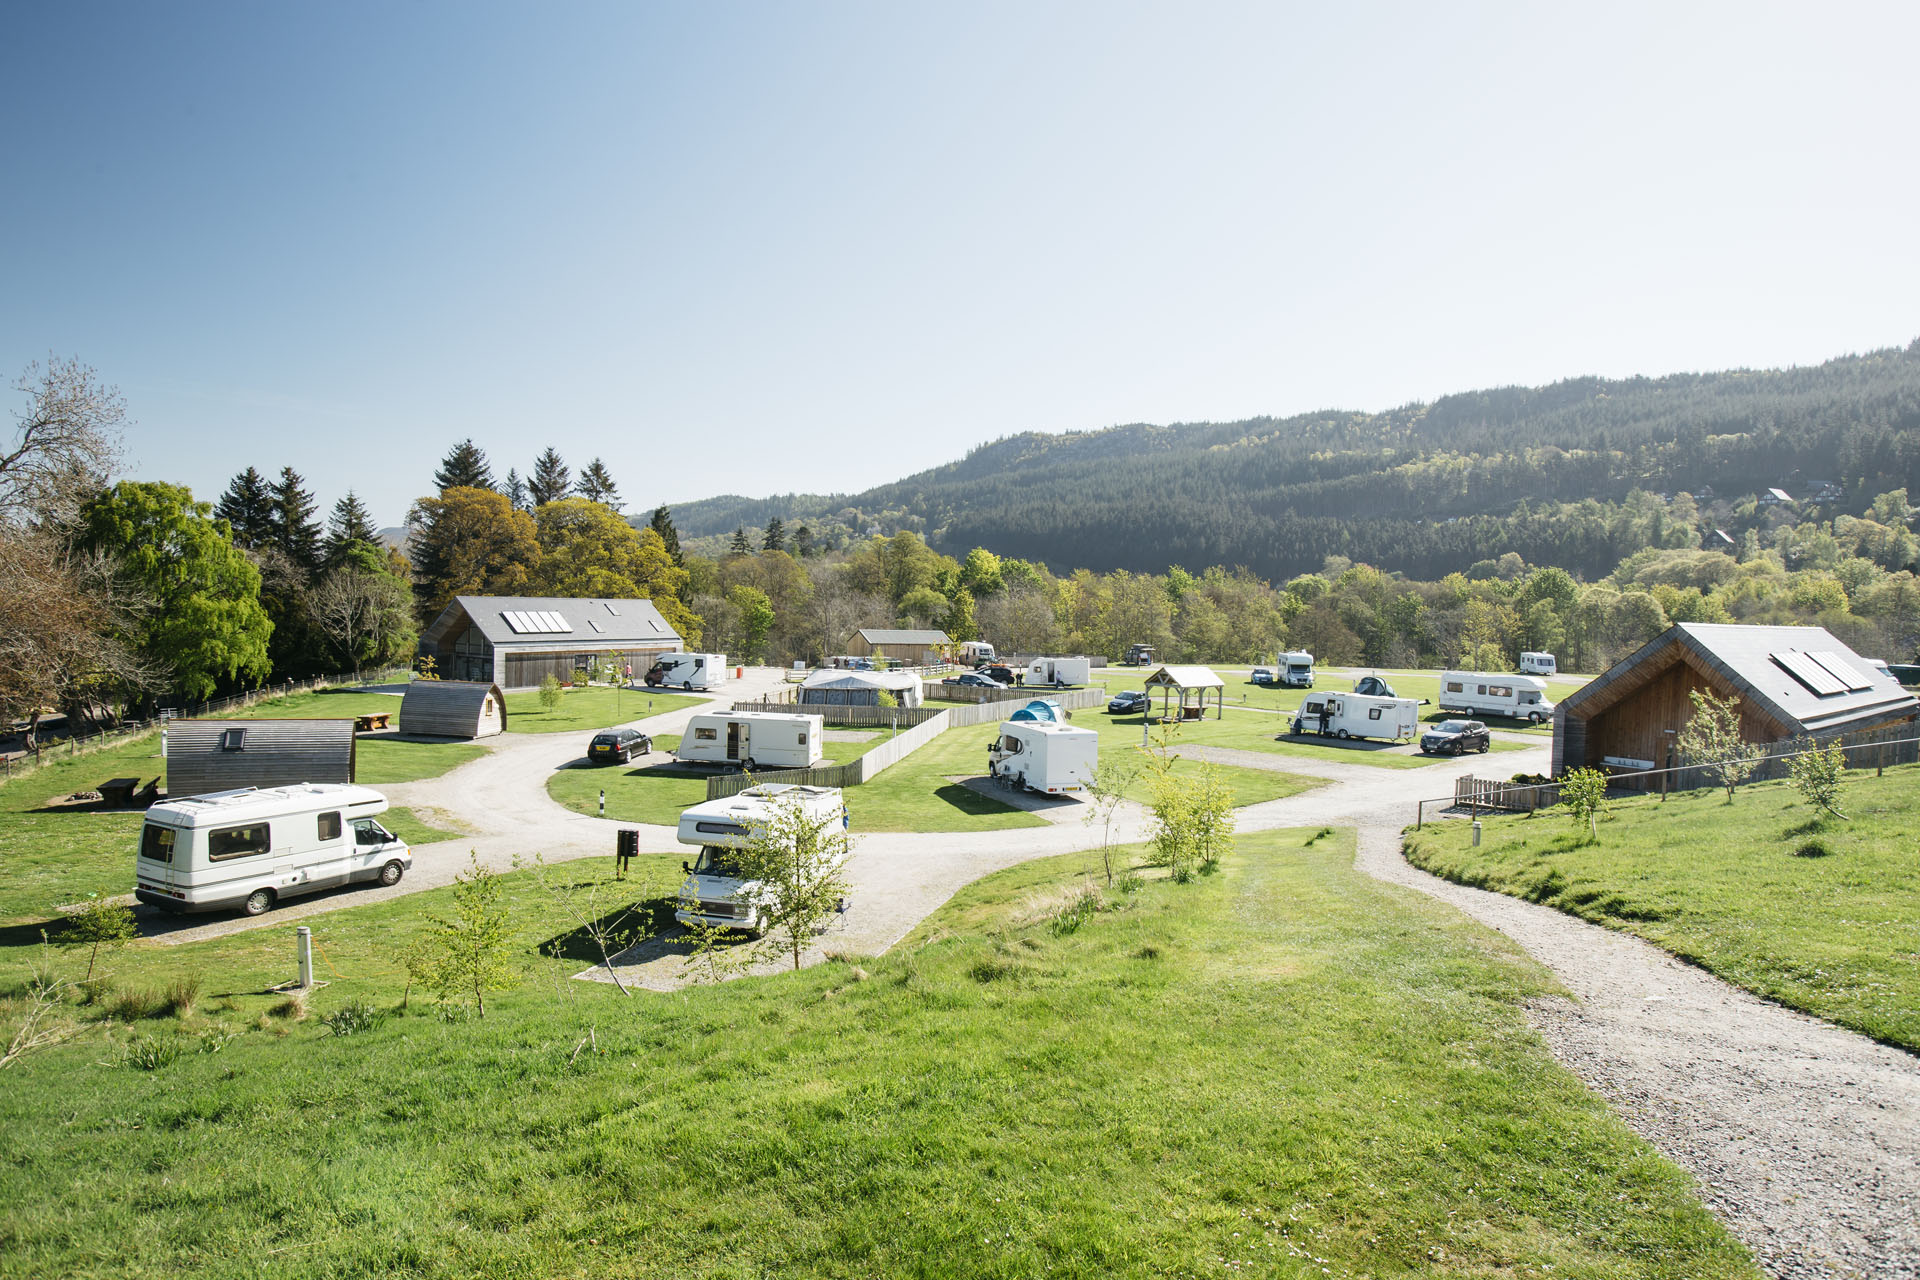 Loch Ness Shores Camping And Caravanning Club Site The Camping